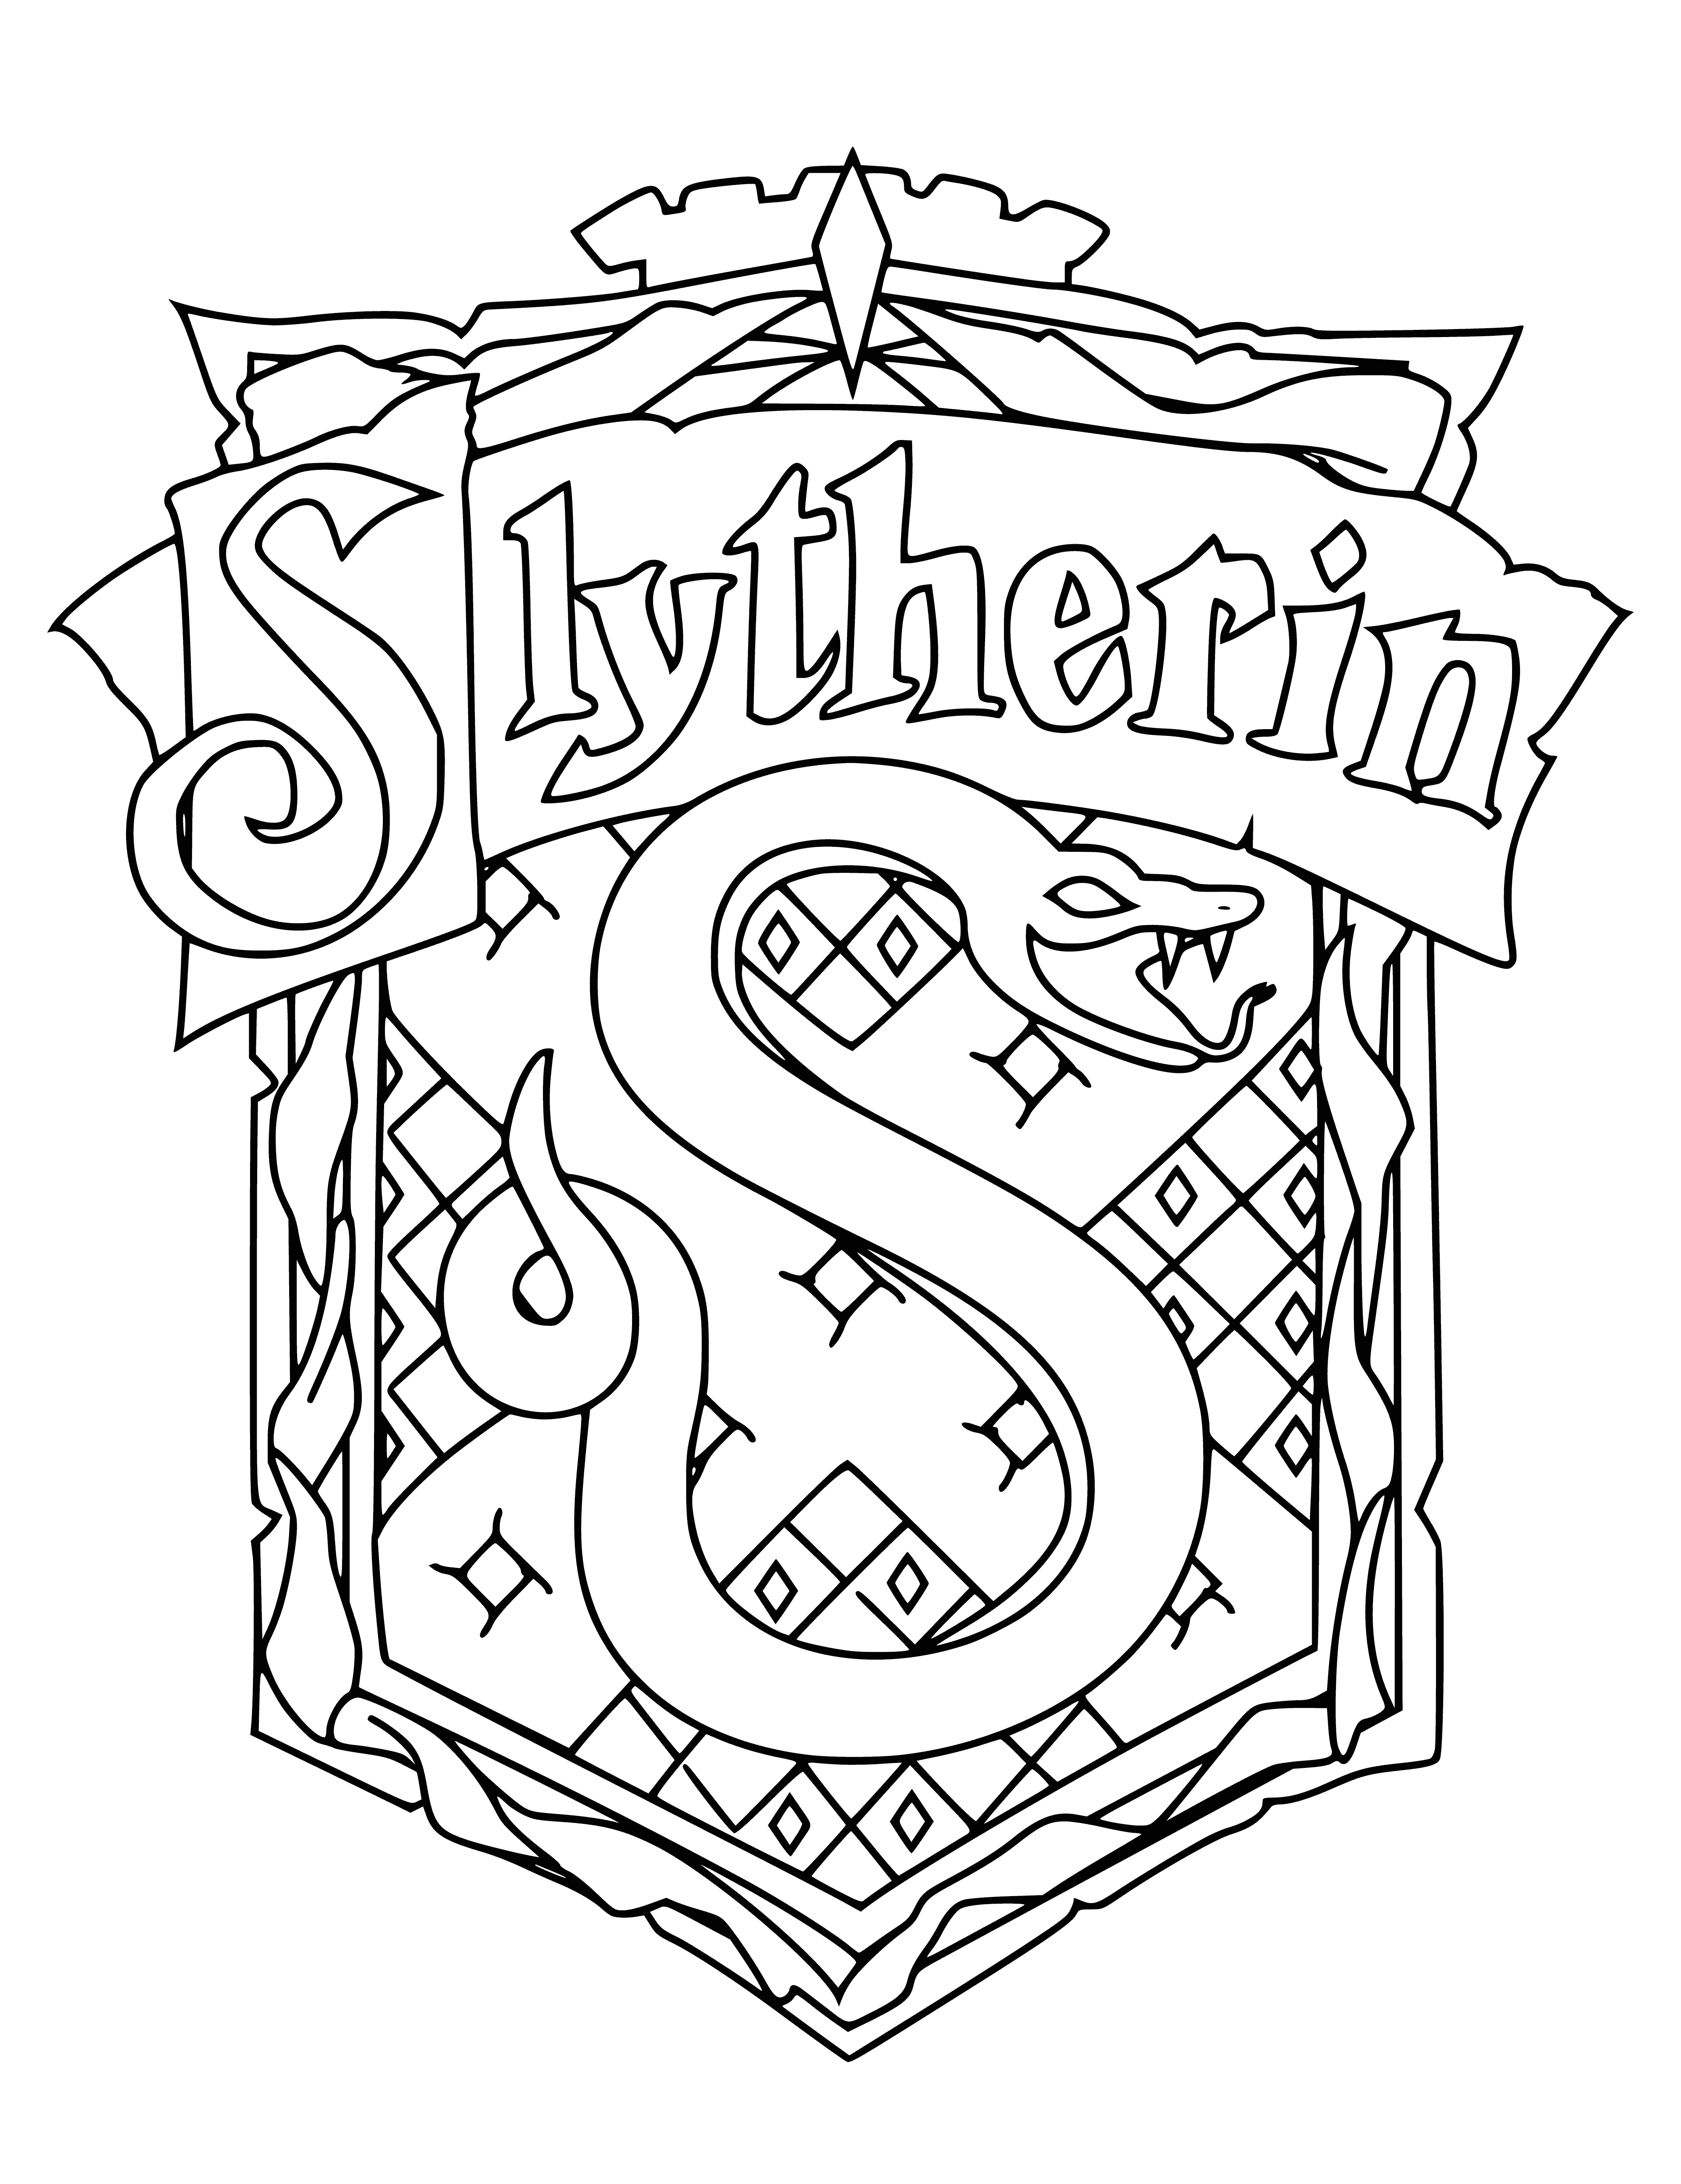 coloring page: Slytherin house crest is a shield w/ green snake coiled around sword mouth open, tongue out, X form'd by sword & two crossed silver daggers beneath.